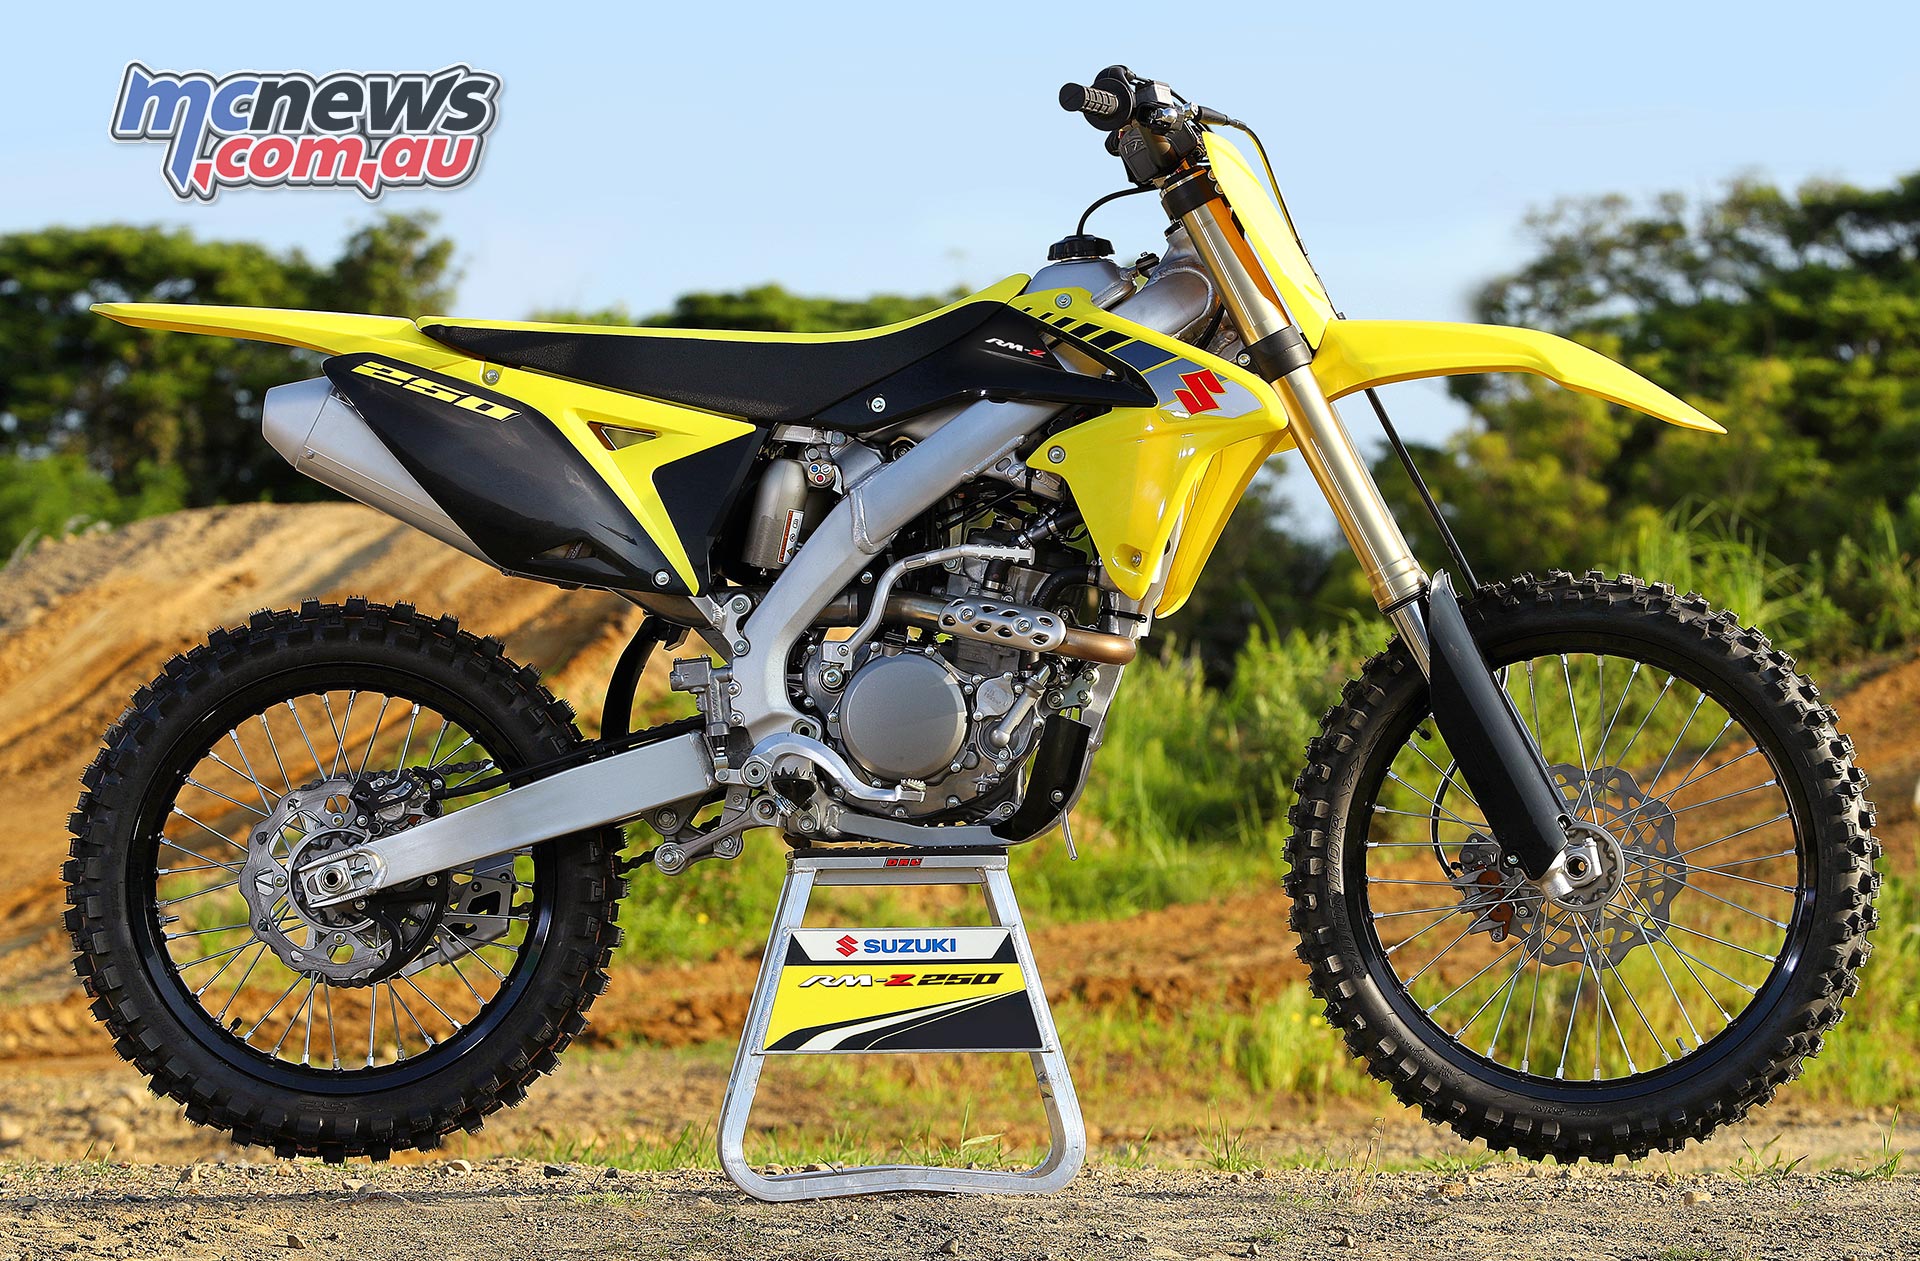 2017 Suzuki Rm Z250 Review Motorcycle News Sport And Reviews